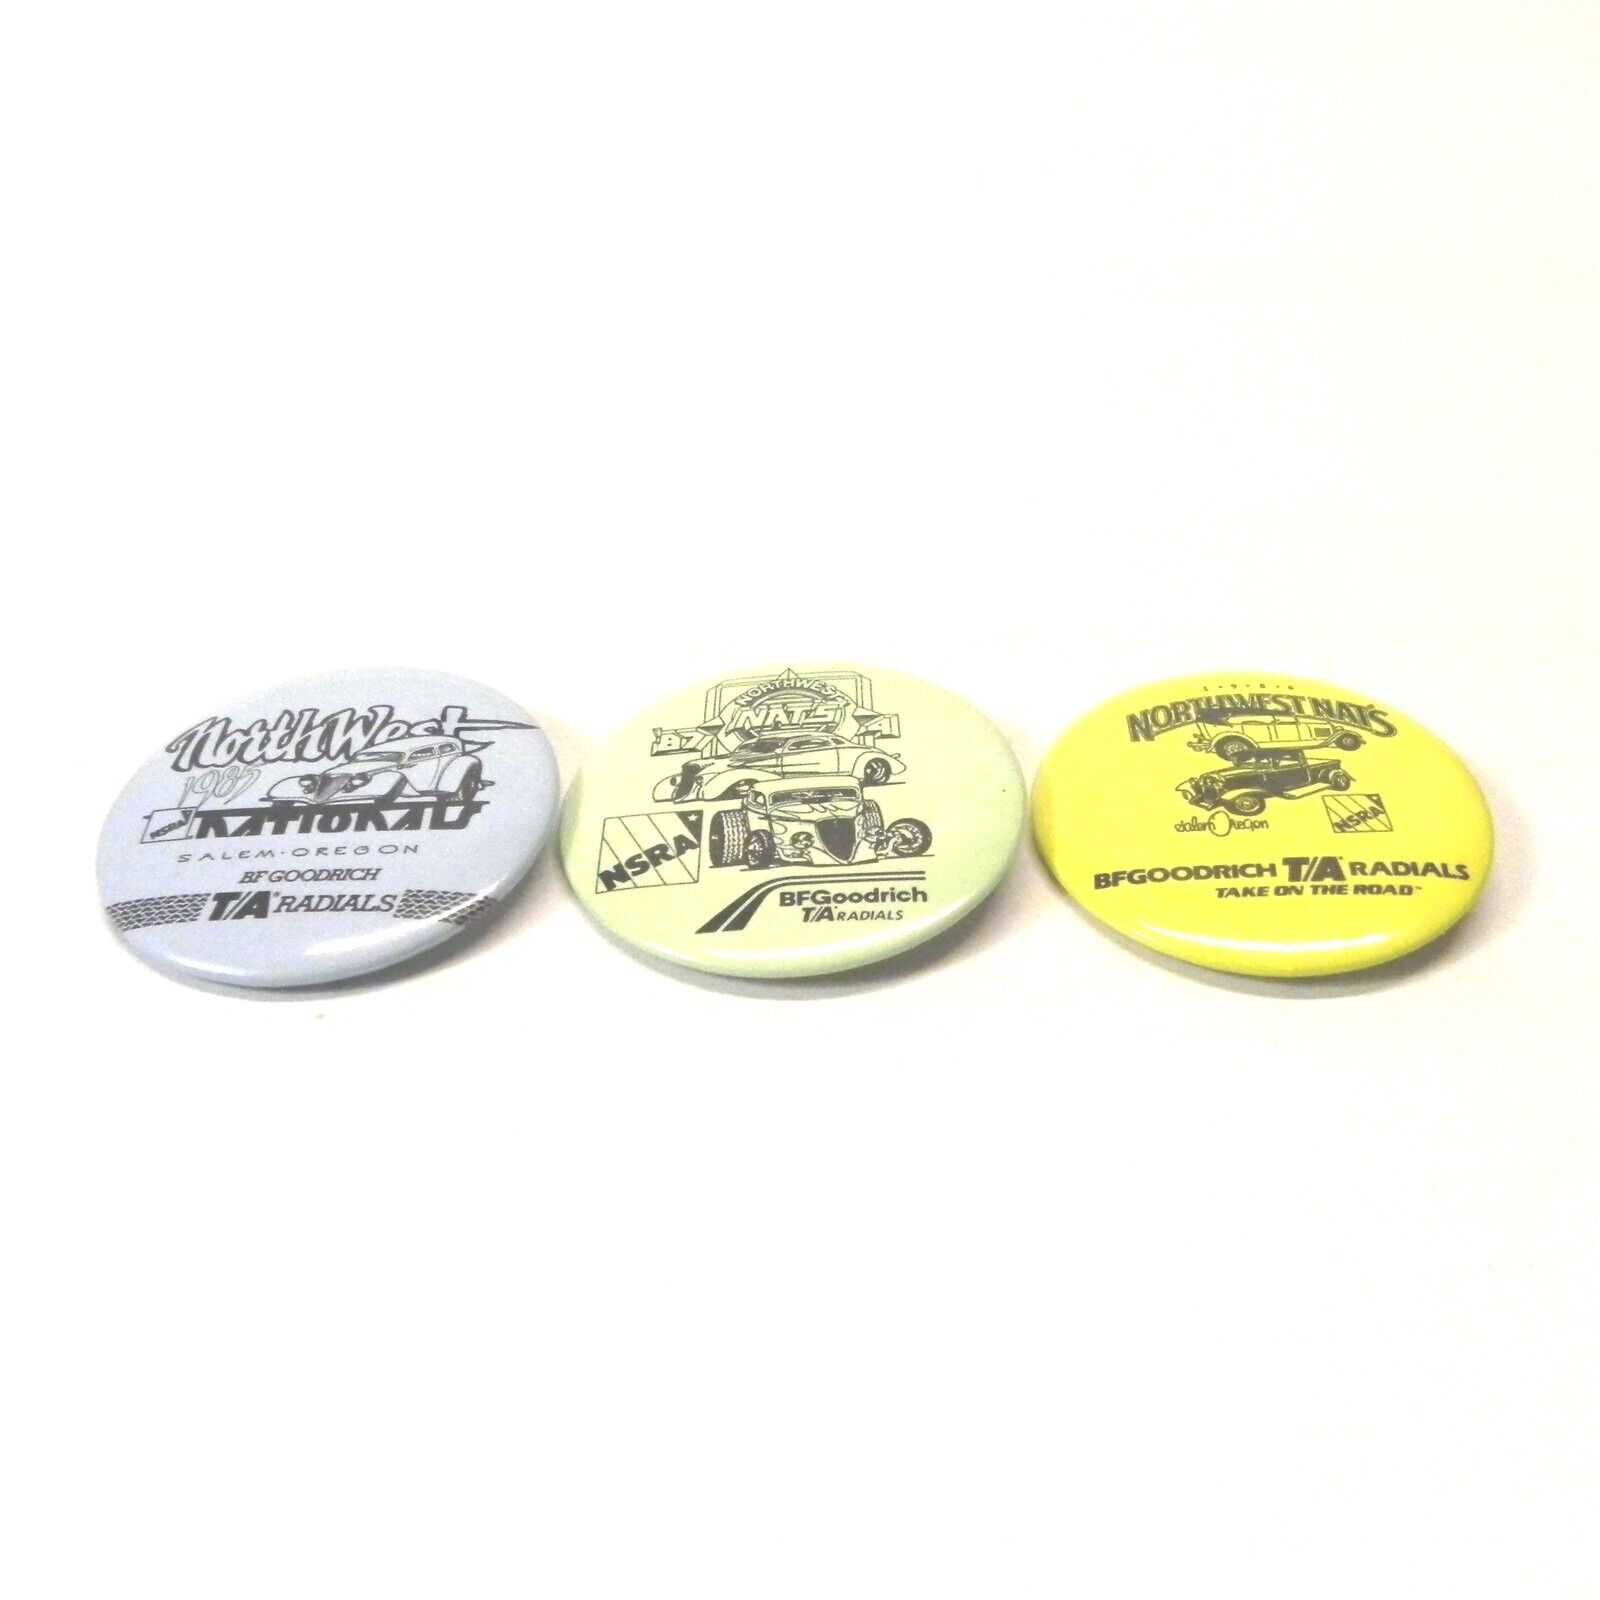 VINTAGE 1985-87 NORTH WEST NATIONALS SALEM, OR BF GOODRICH PINS BUTTONS LOT OF 3